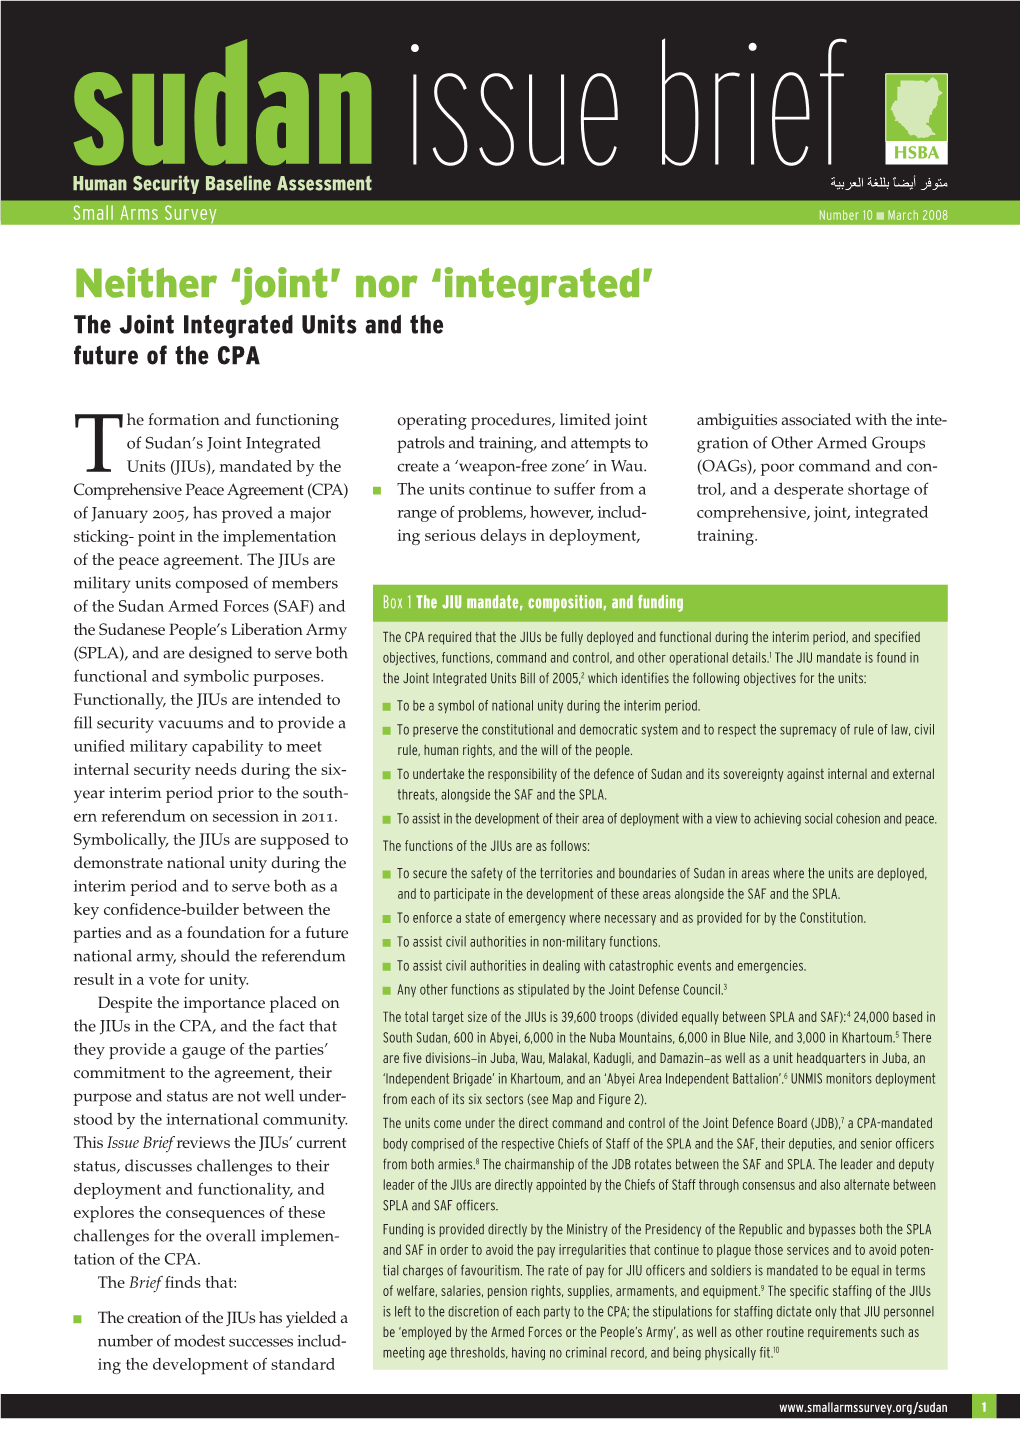 Neither 'Joint' Nor 'Integrated'